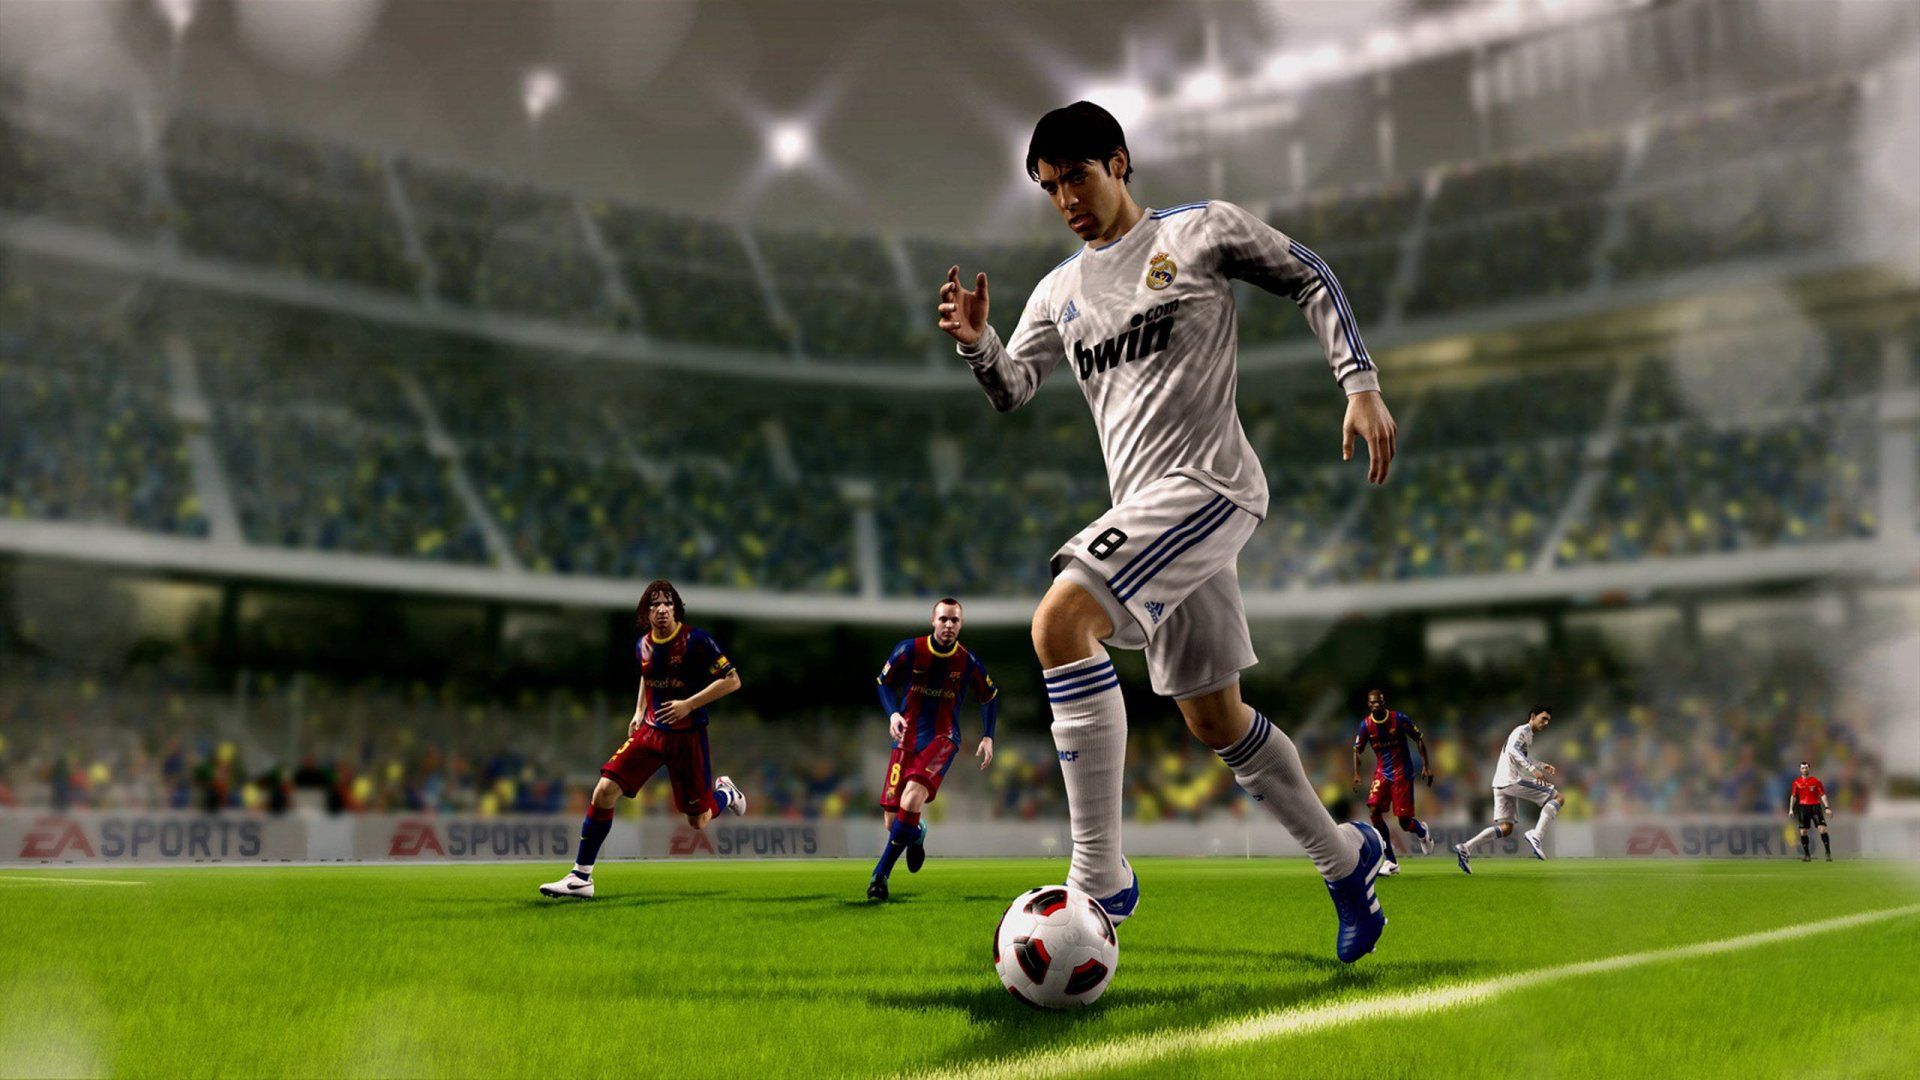 wallpaper free download Page Find the best free stock 1920×1200 Fifa Wallpaper (49 Wallpaper). Adorable Wallpaper. Fun sports, Real madrid game, Soccer world